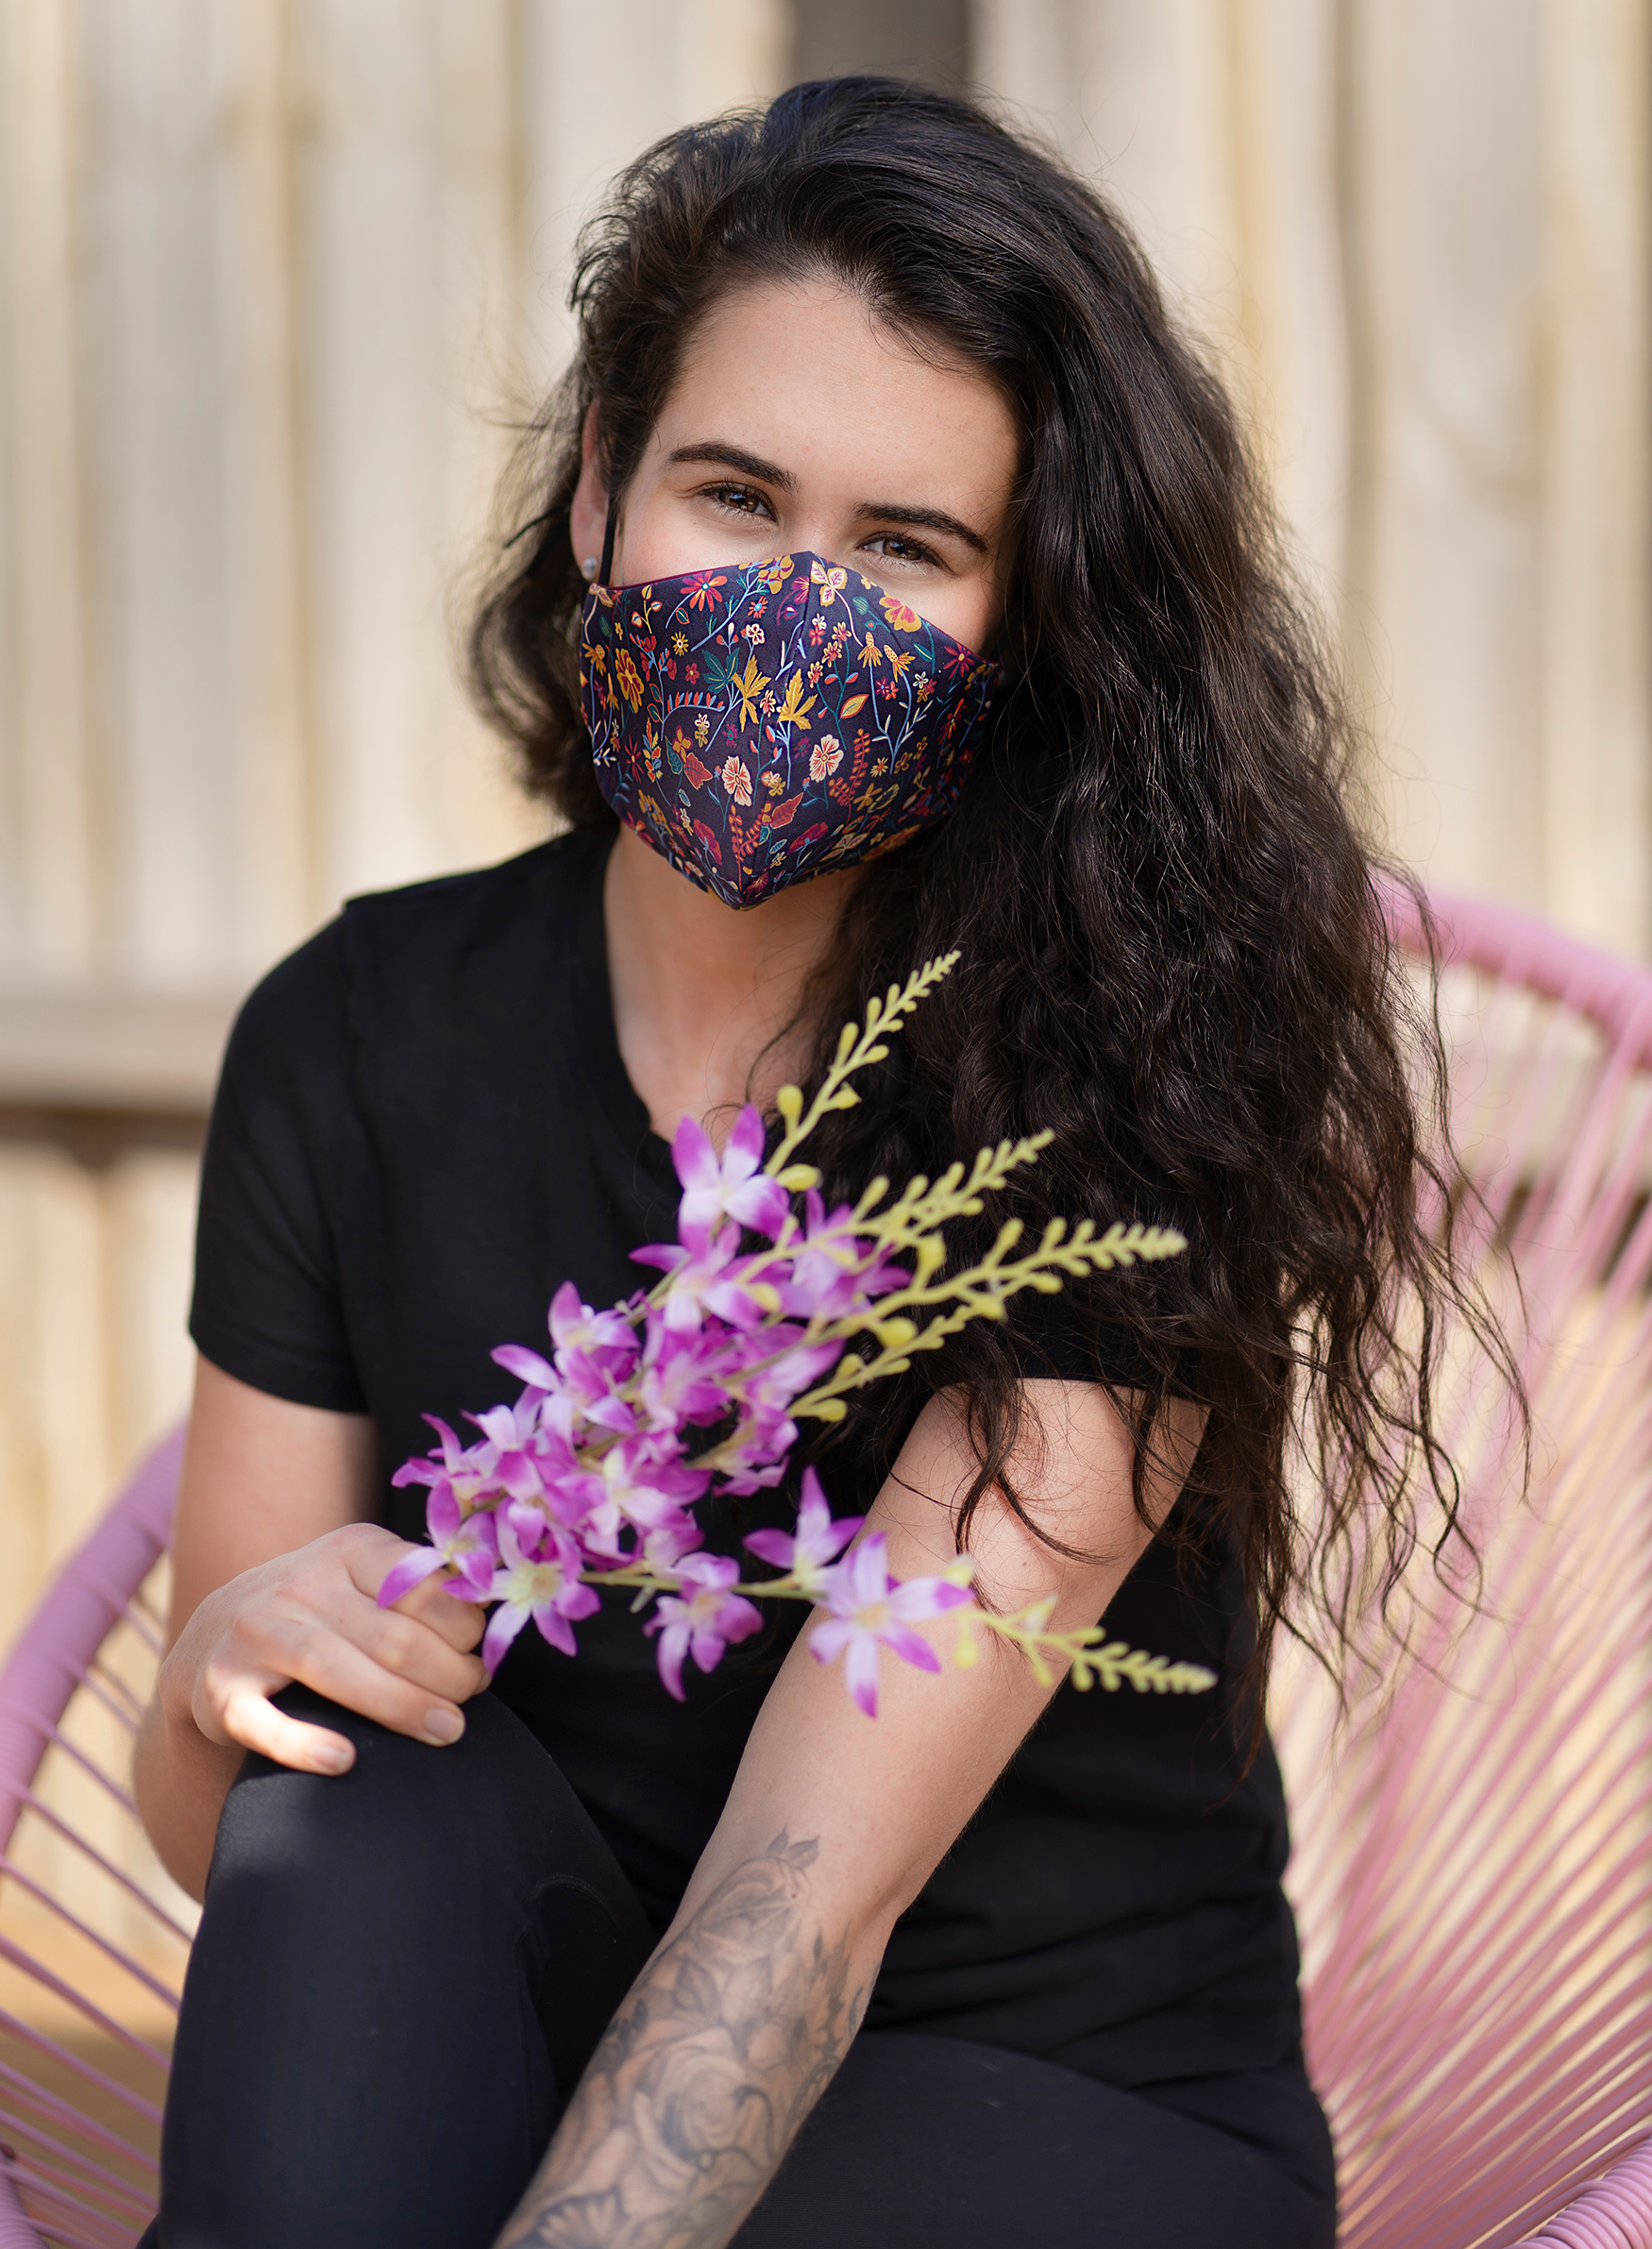 Triple layered face mask made in Melbourne Australia from cotton and poplin featuring a unique Liberty London floral print